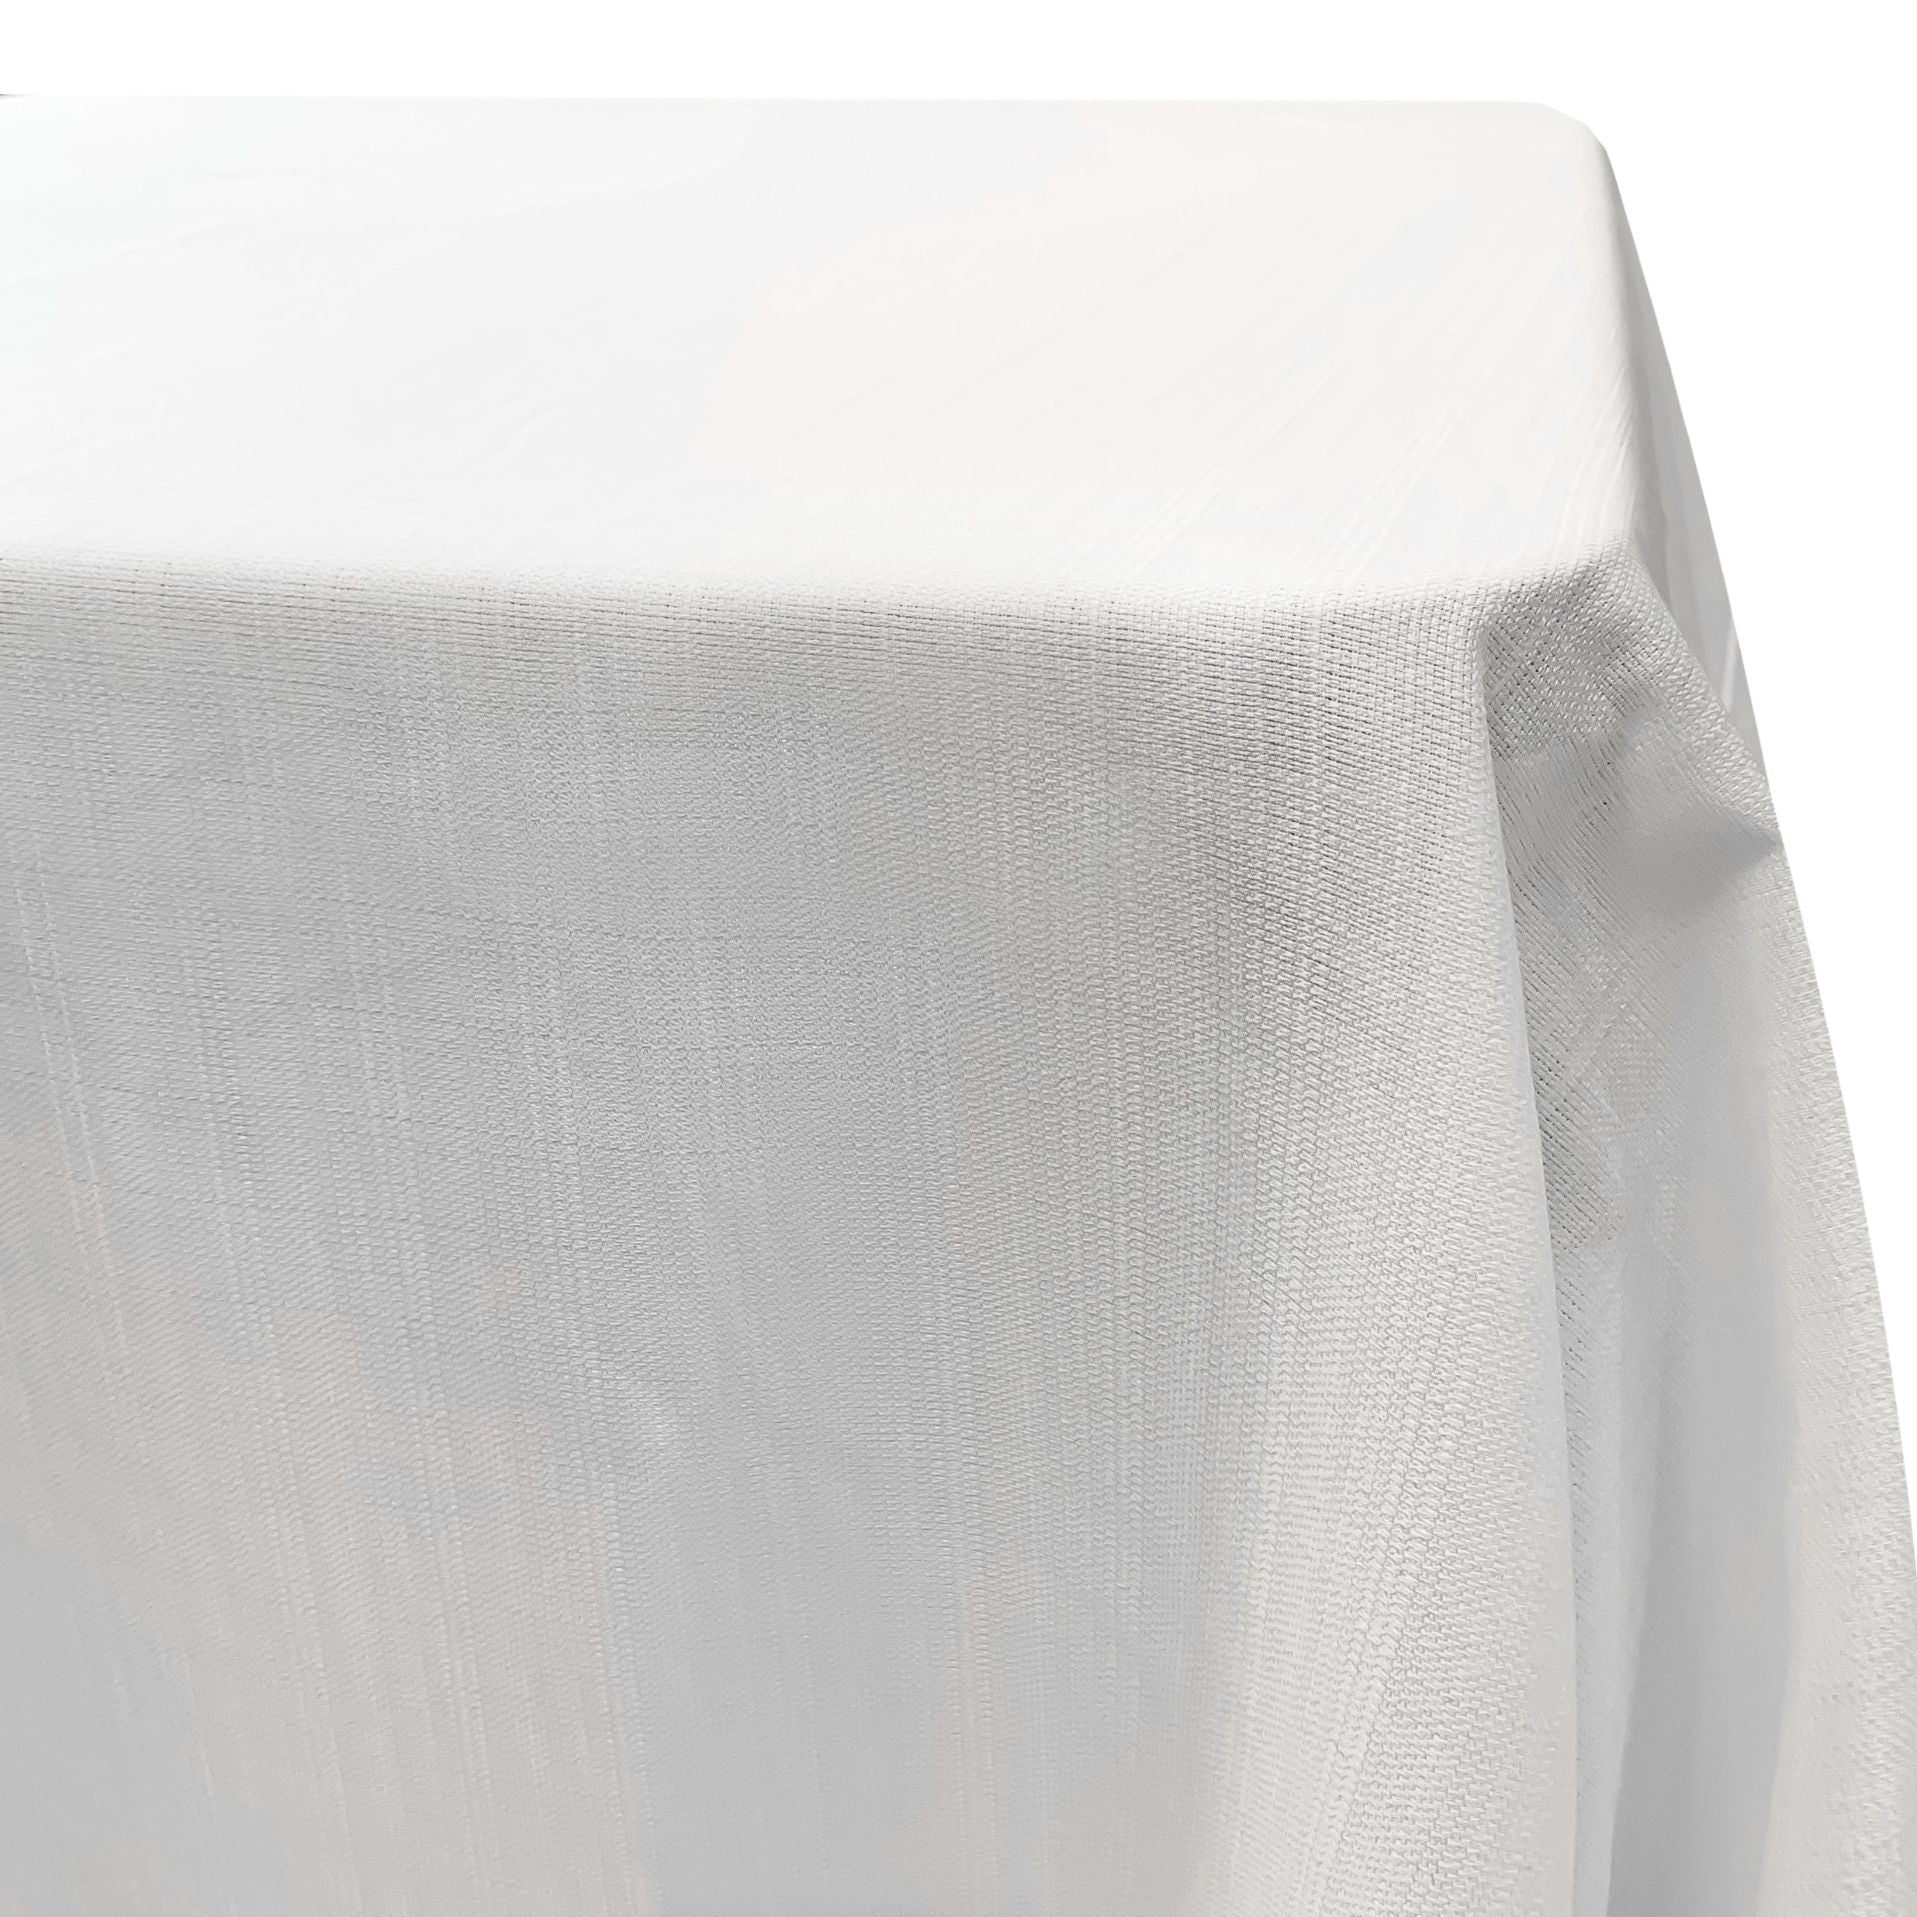 White Rustic Table Cover